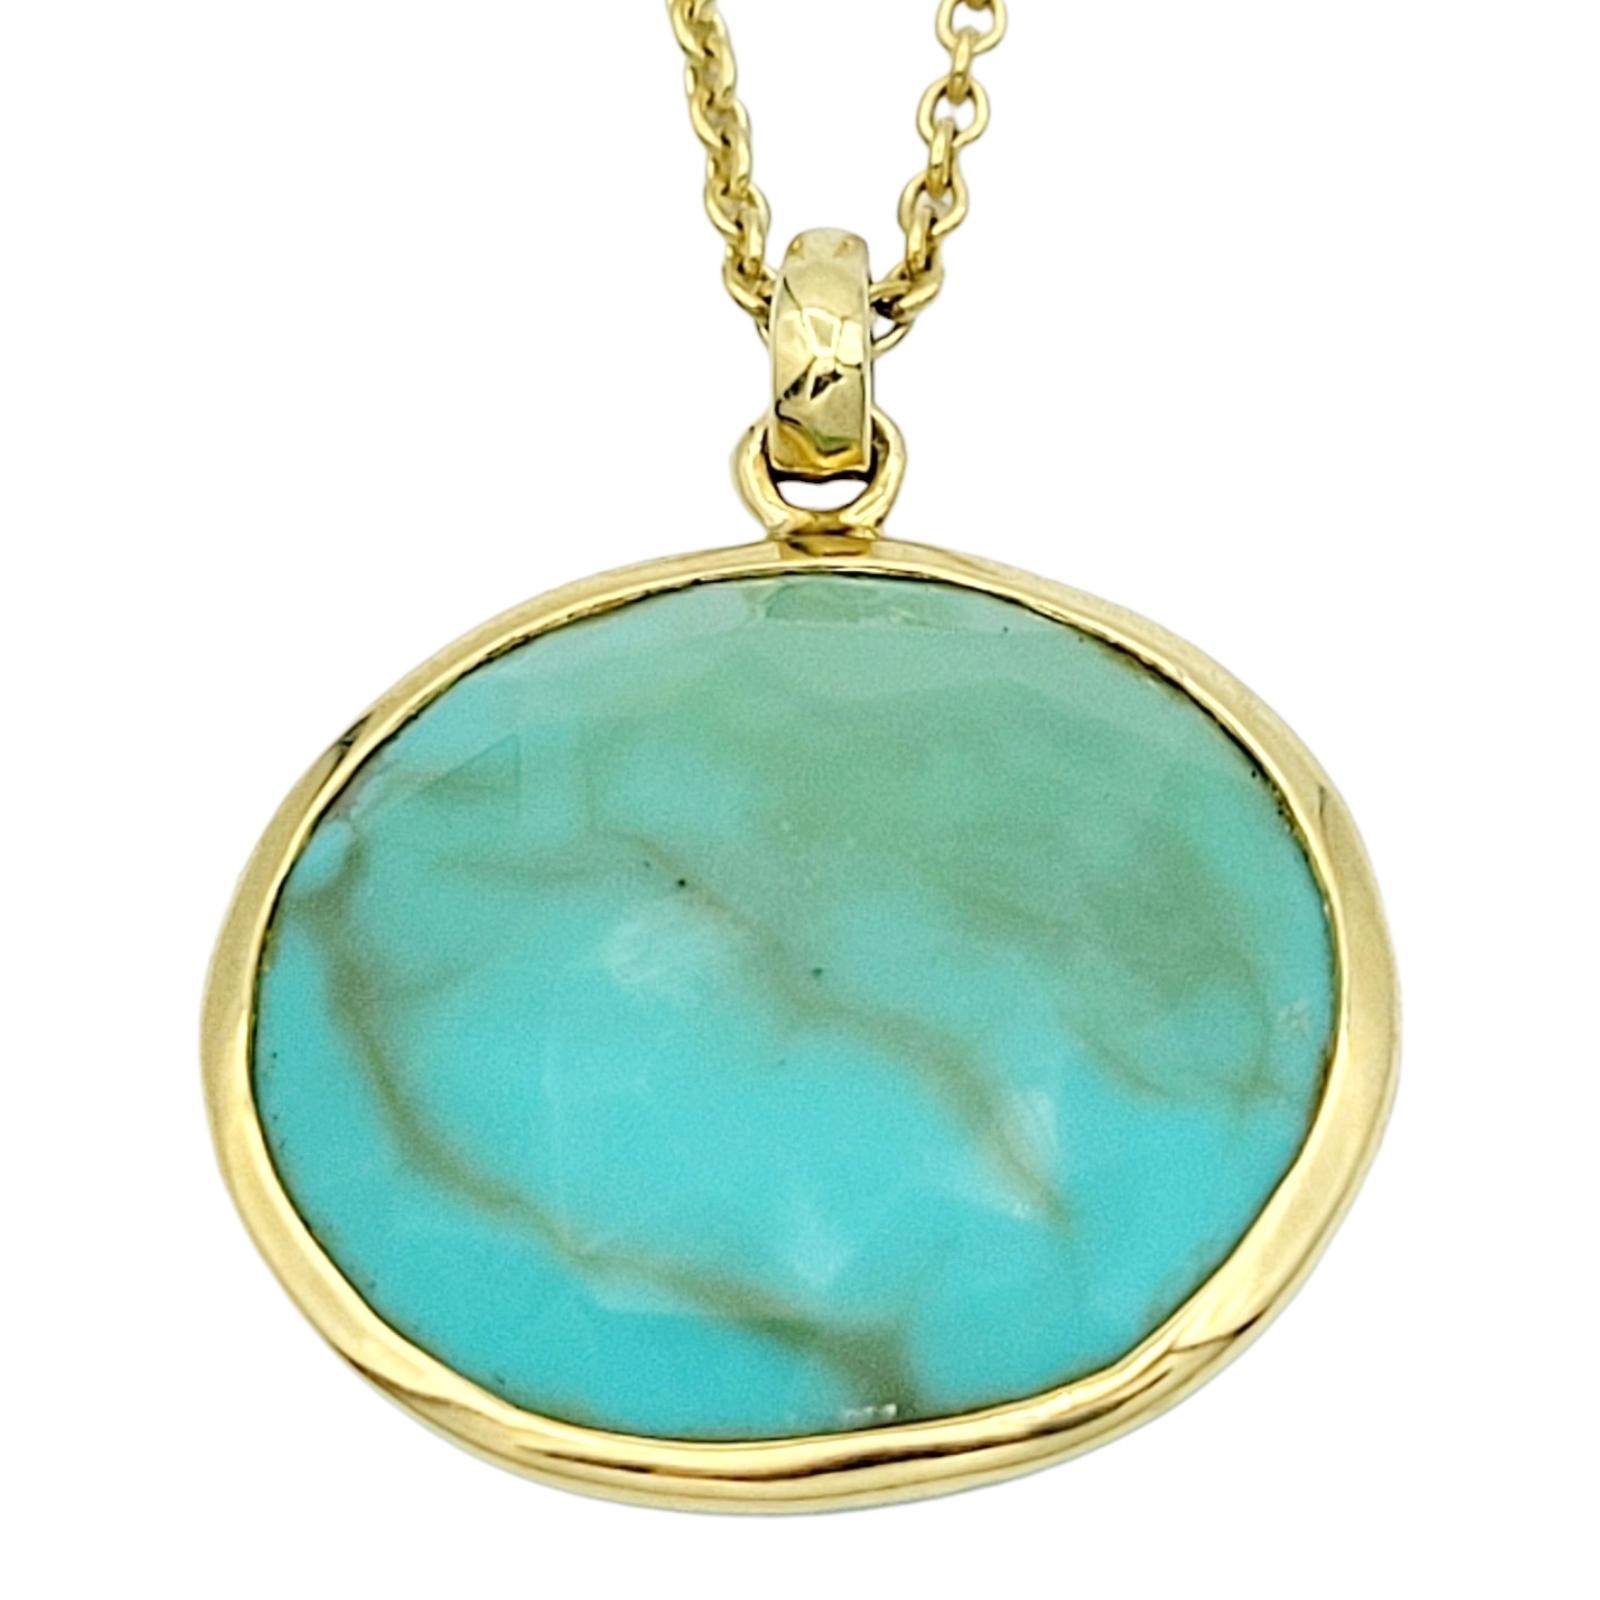 This exquisite pendant necklace is part of the IPPOLITA Lollipop collection. IPPOLITA was founded in 1999 by the Italian artist and designer Ippolita Rostagno. The Lollipop collection features a vibrant array of different gemstones that are thin and